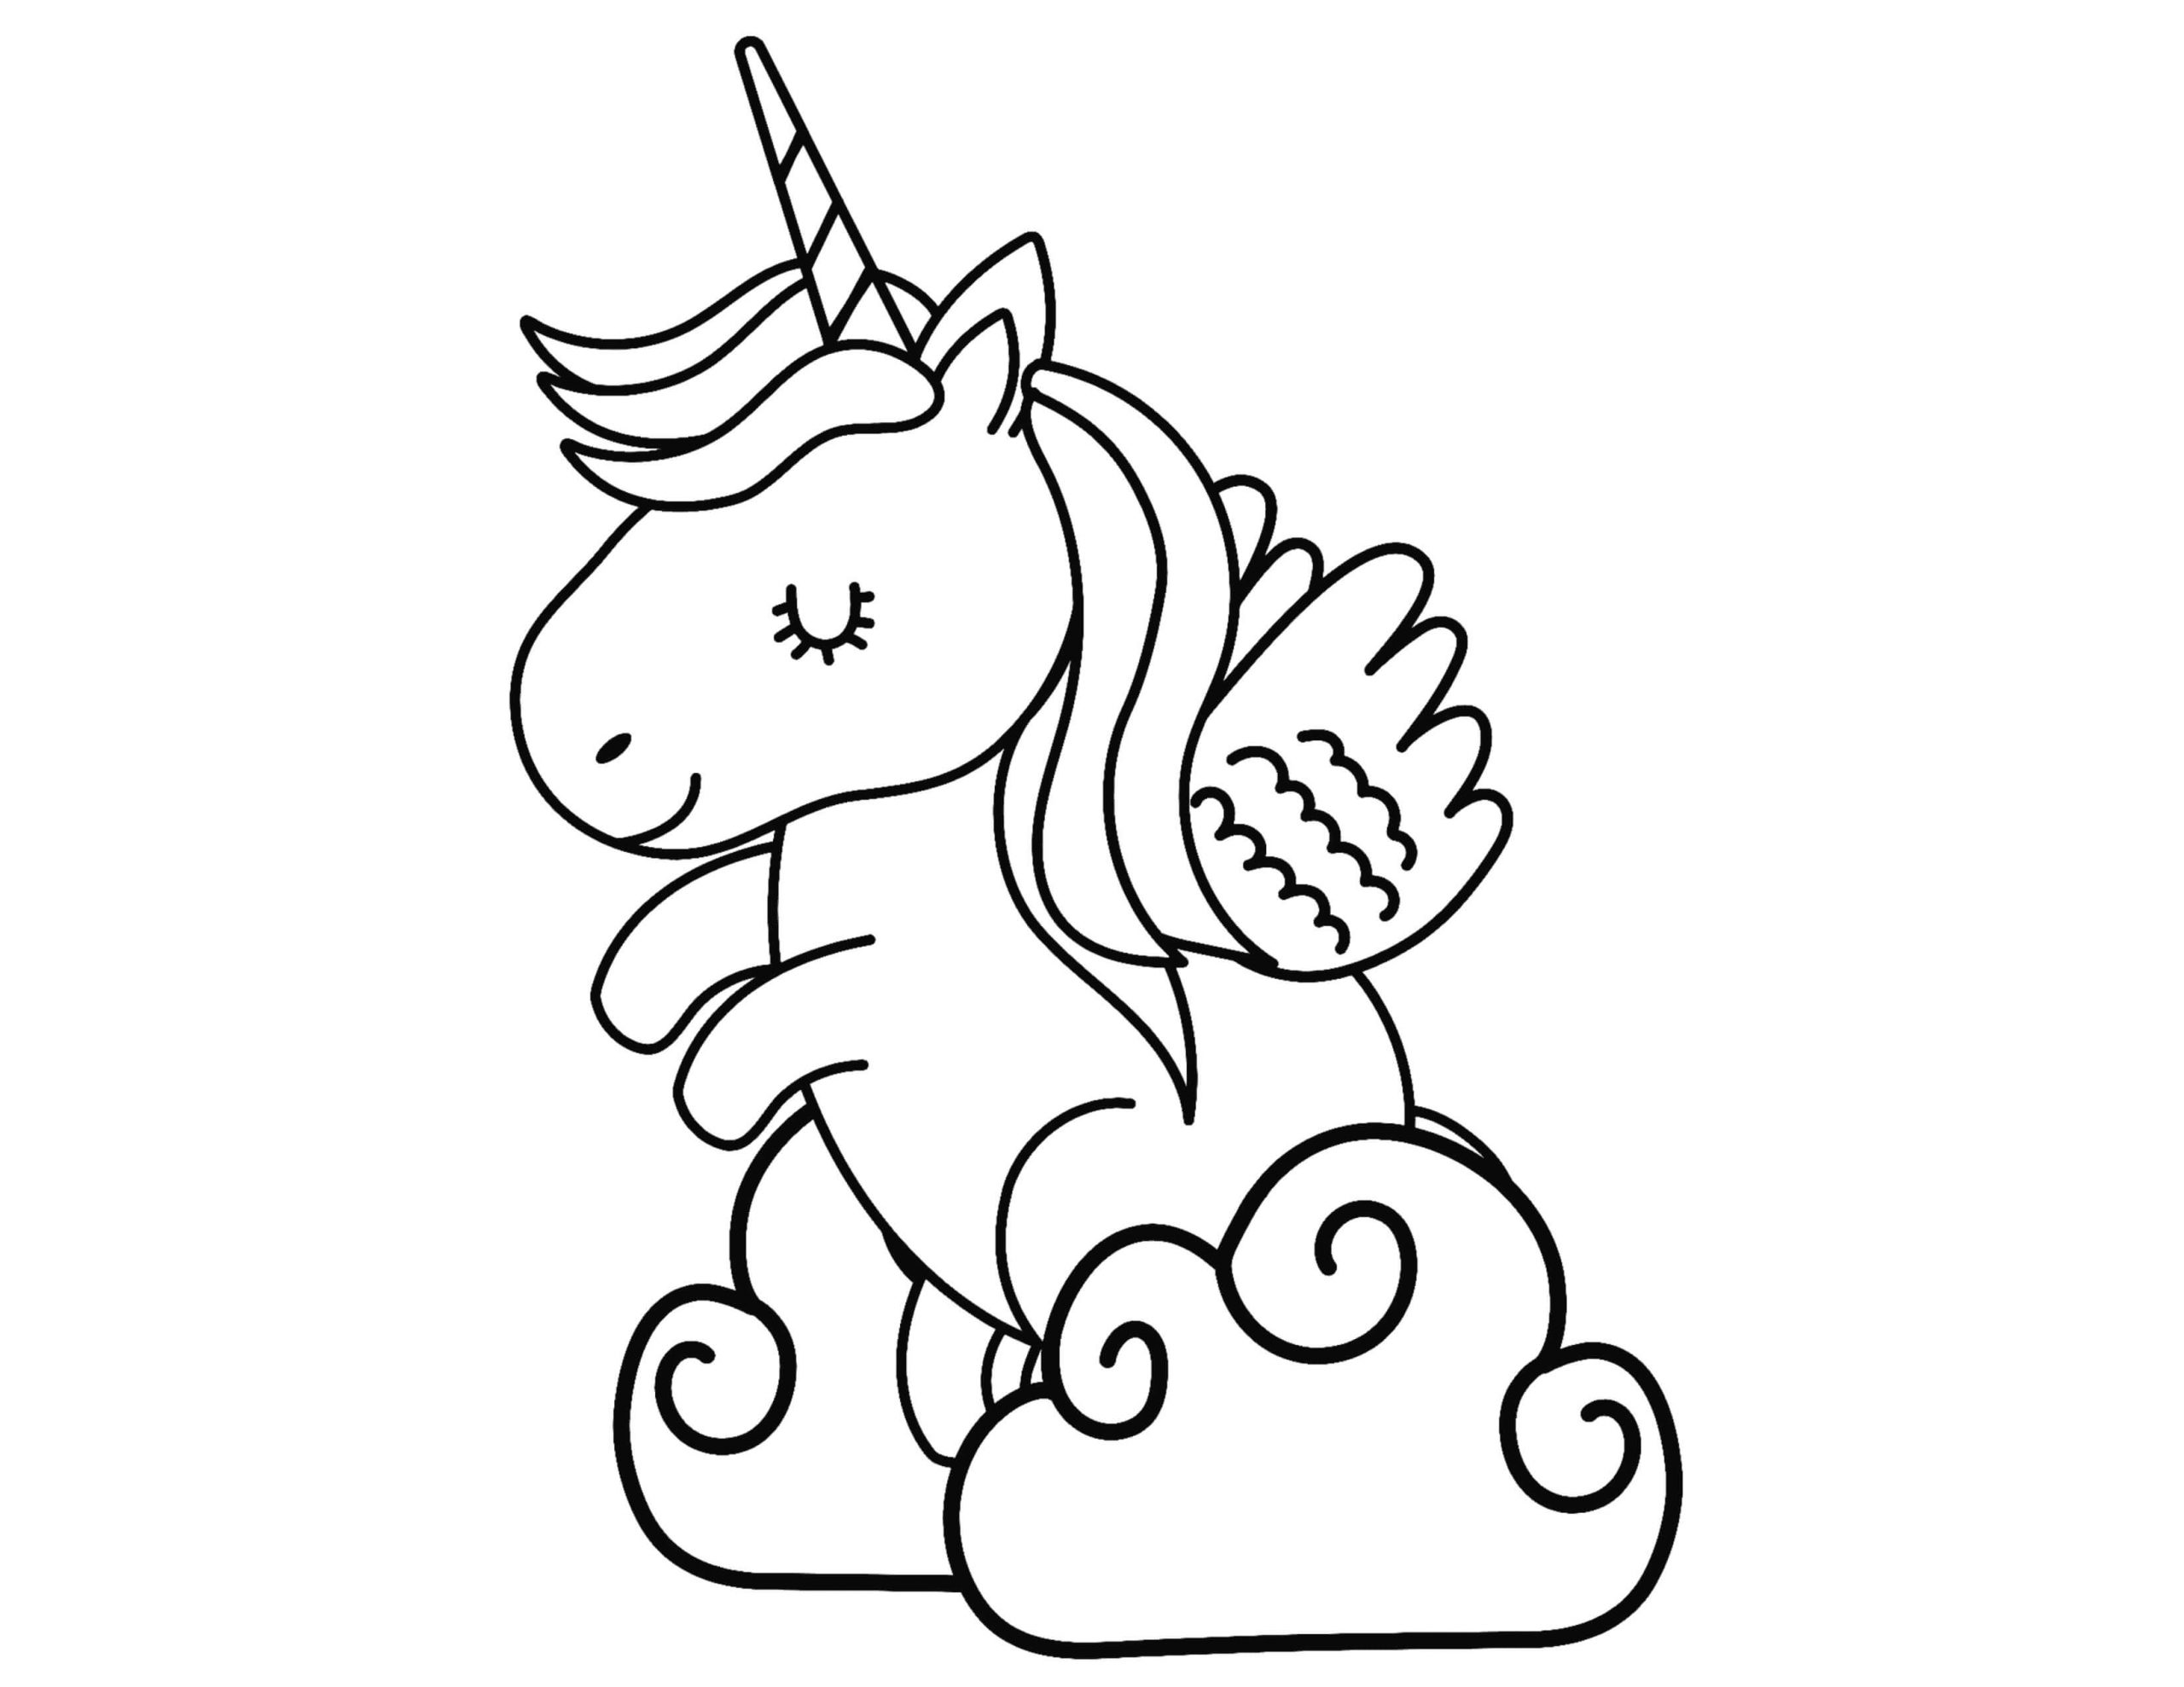 Smiling Unicorn with Clouds coloring page